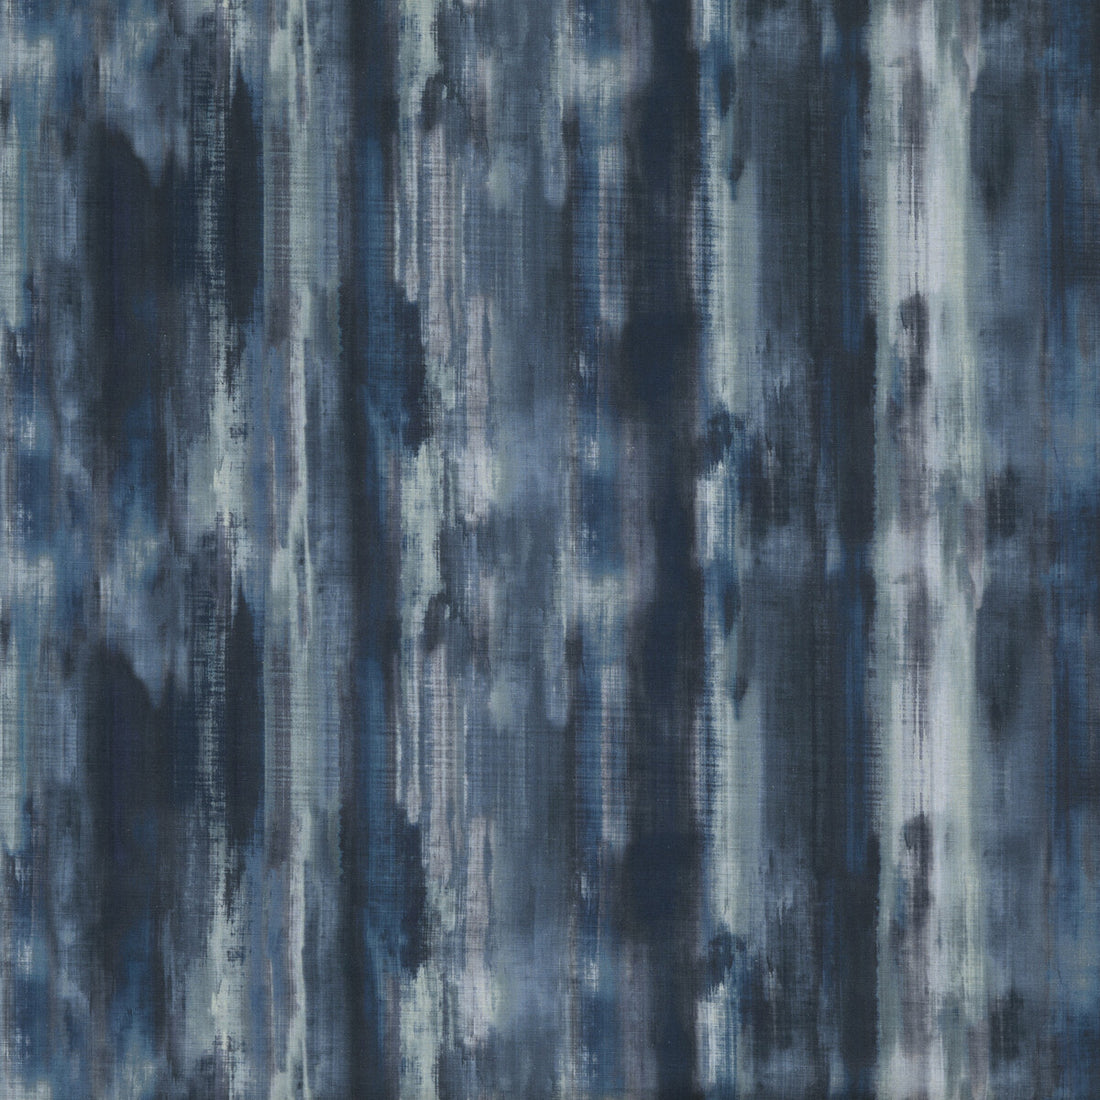 Fallingwater fabric in indigo color - pattern ED75033.1.0 - by Threads in the Moro collection